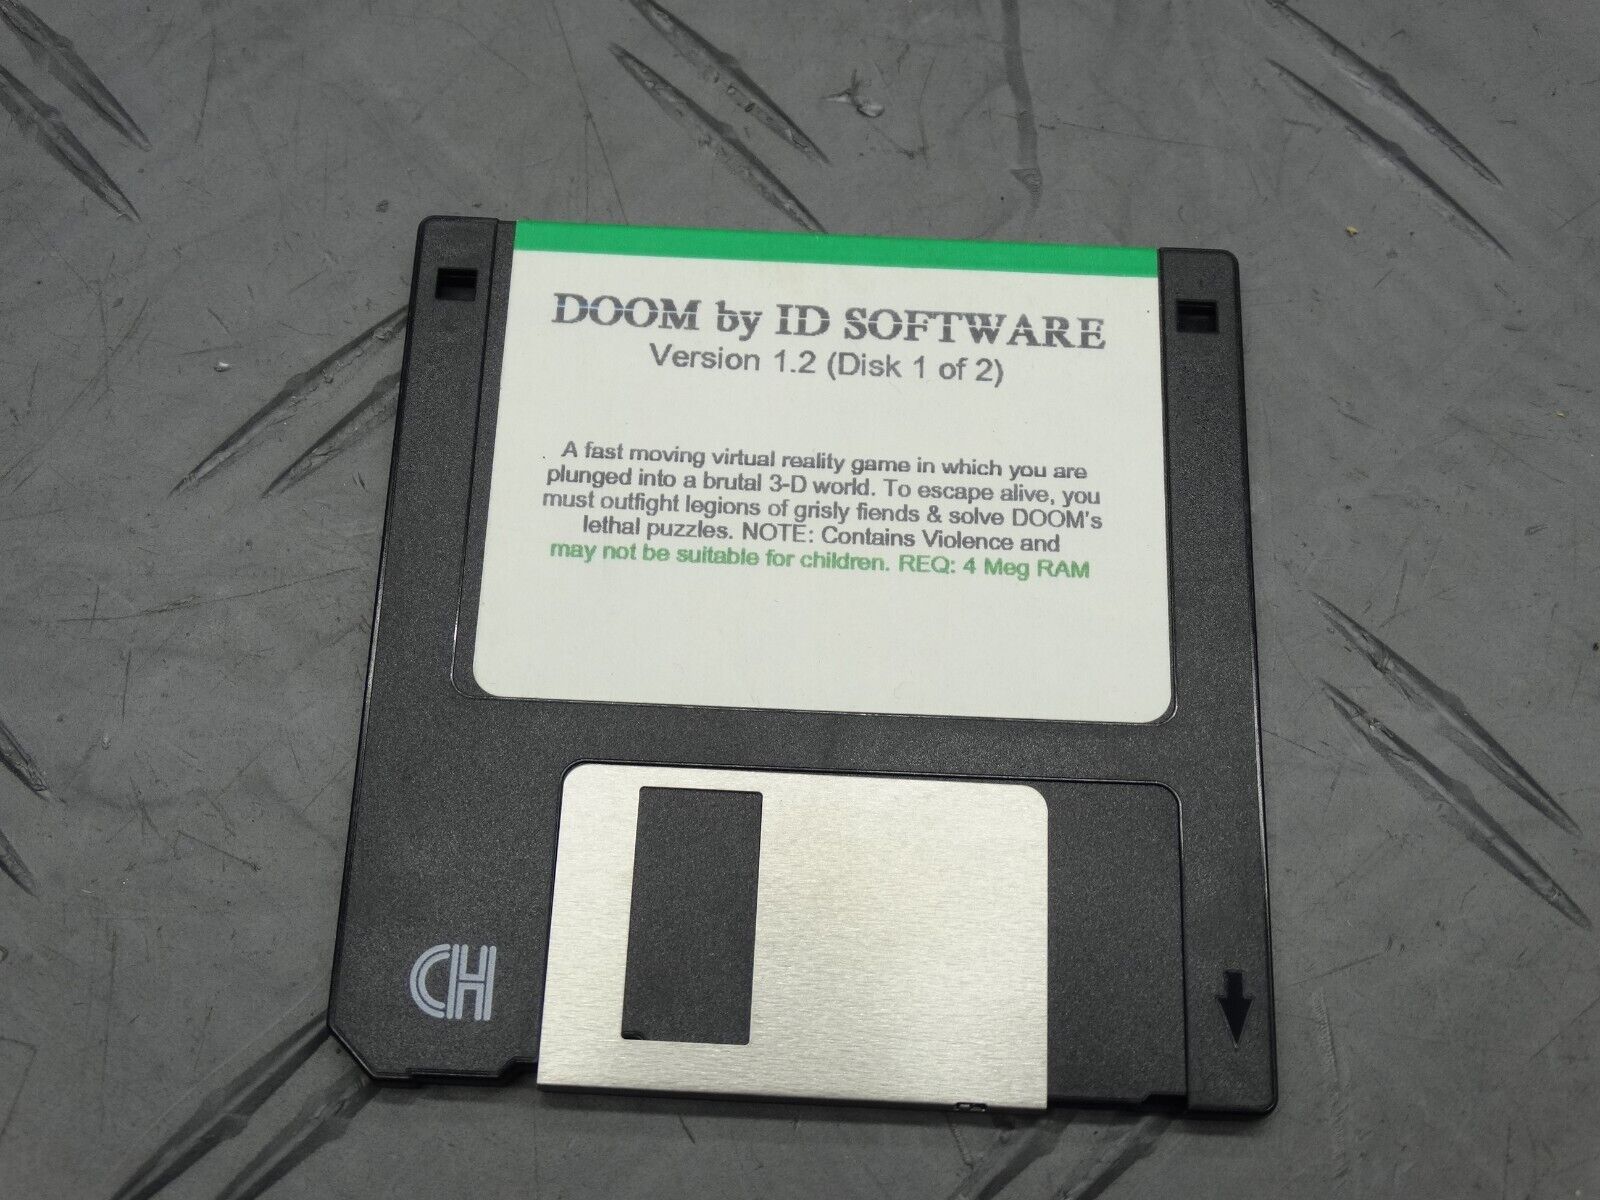 Doom Version 1.2 by ID Software Game 3.5” Floppy Vintage (Disk 1 of 2 Only)